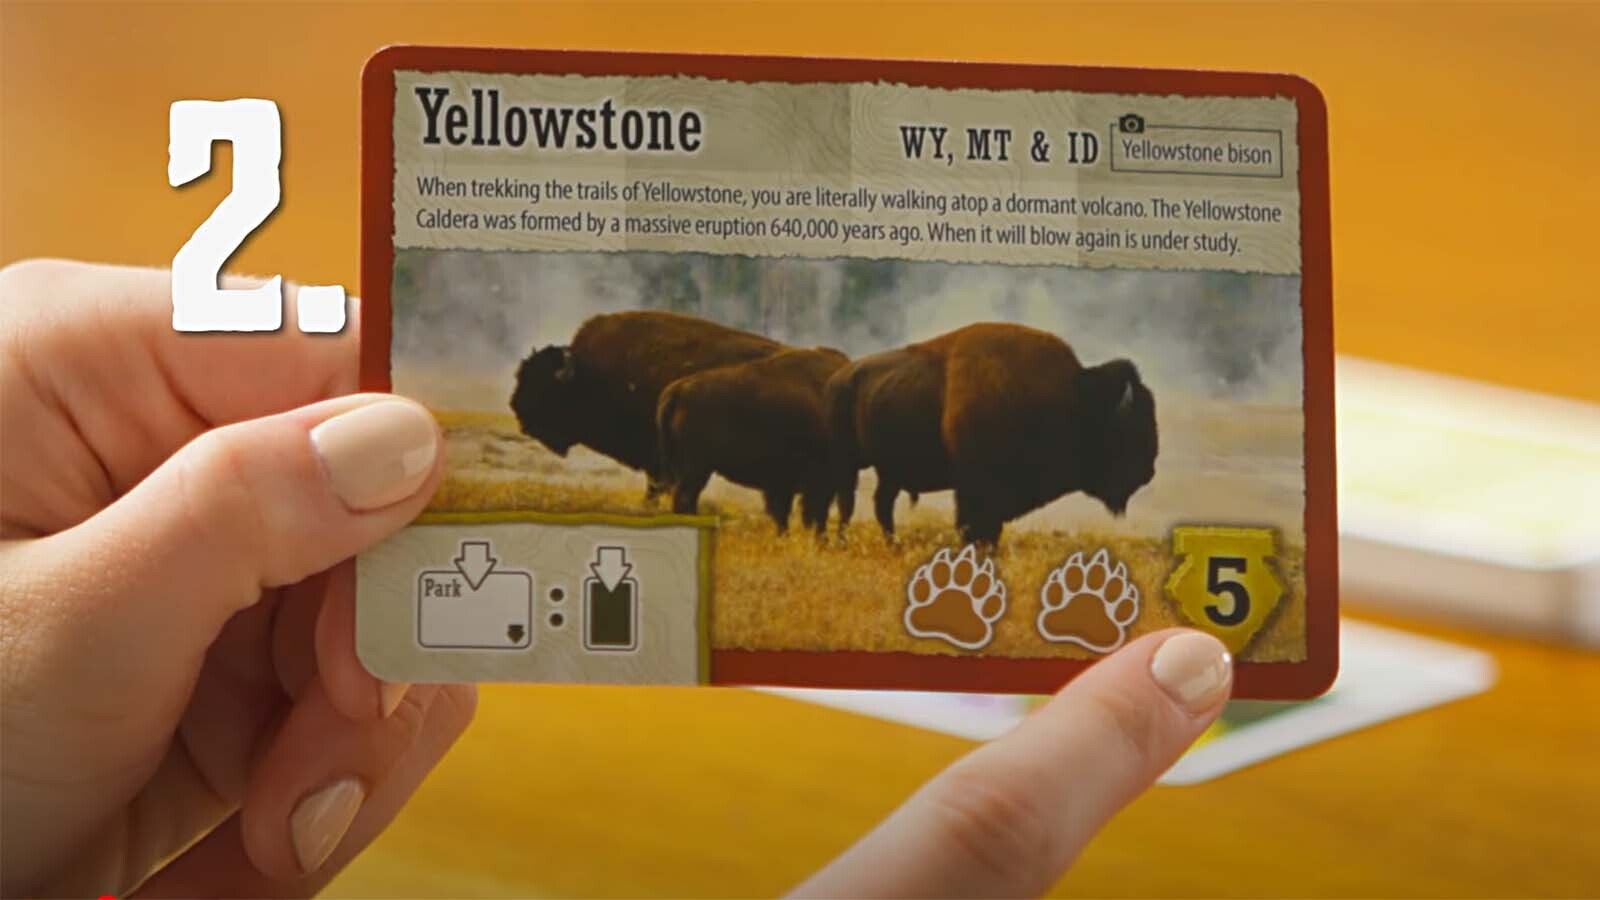 Yellowstone is one of the special "major" national parks in the game.